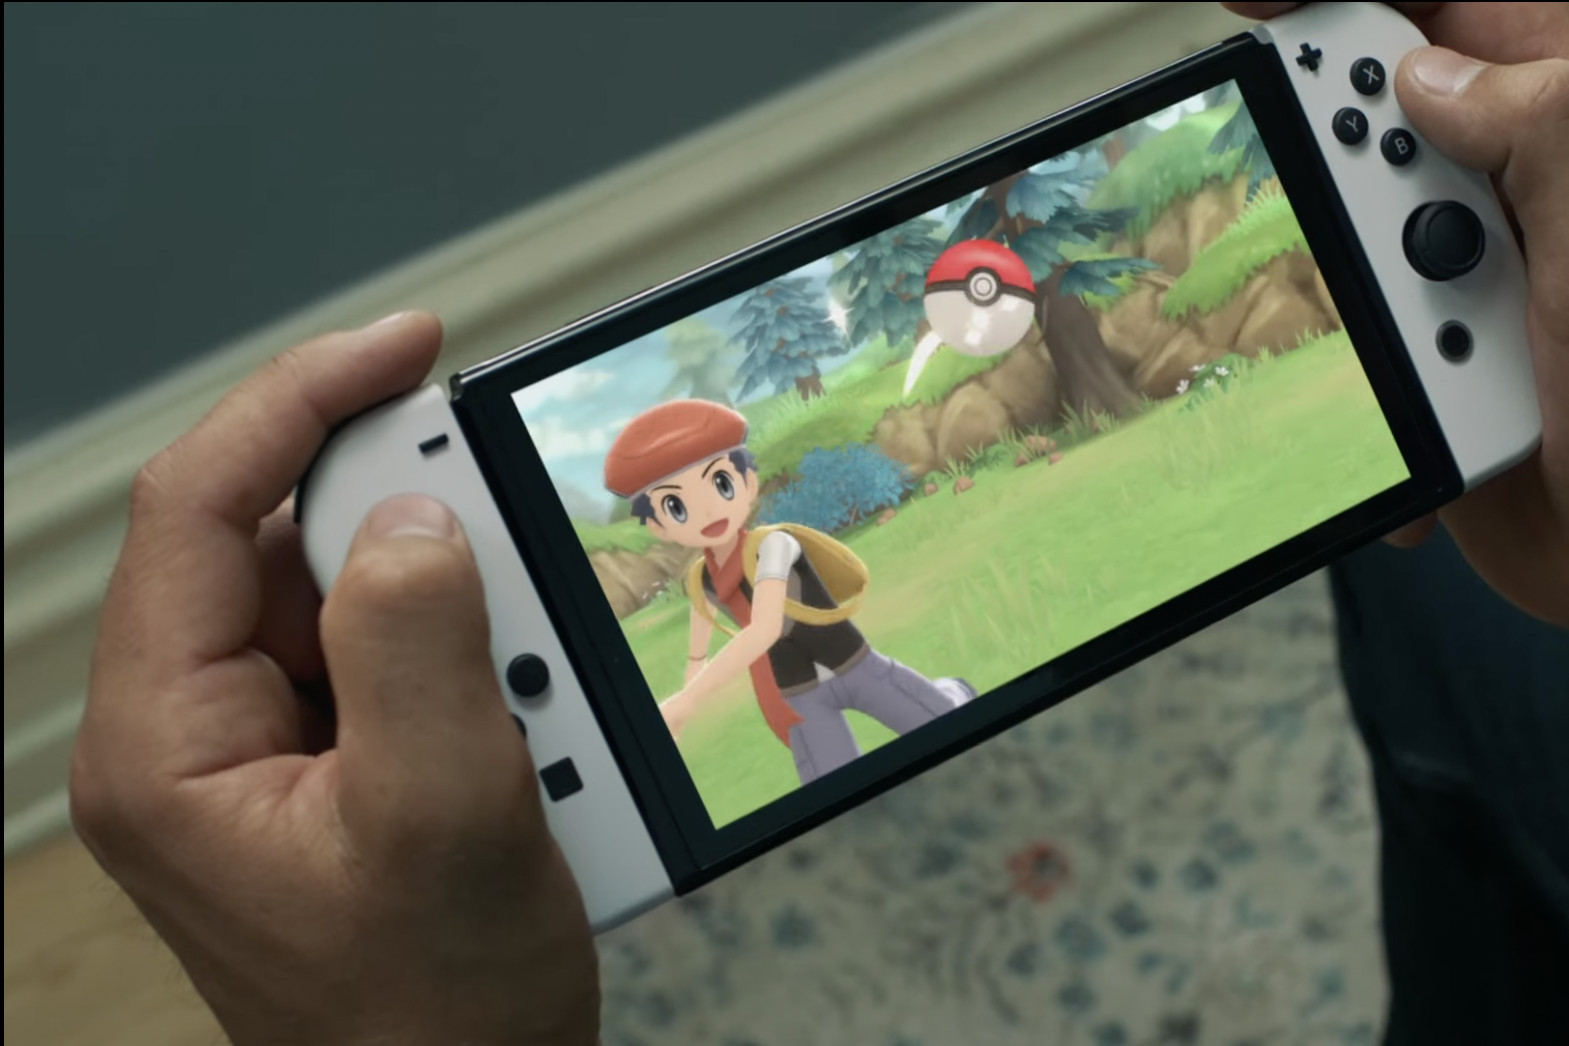 A pair of hands hold a Nintendo Switch console. On the screen is a boy wearing a red beret throwing a red-and-white ball across green grass. 